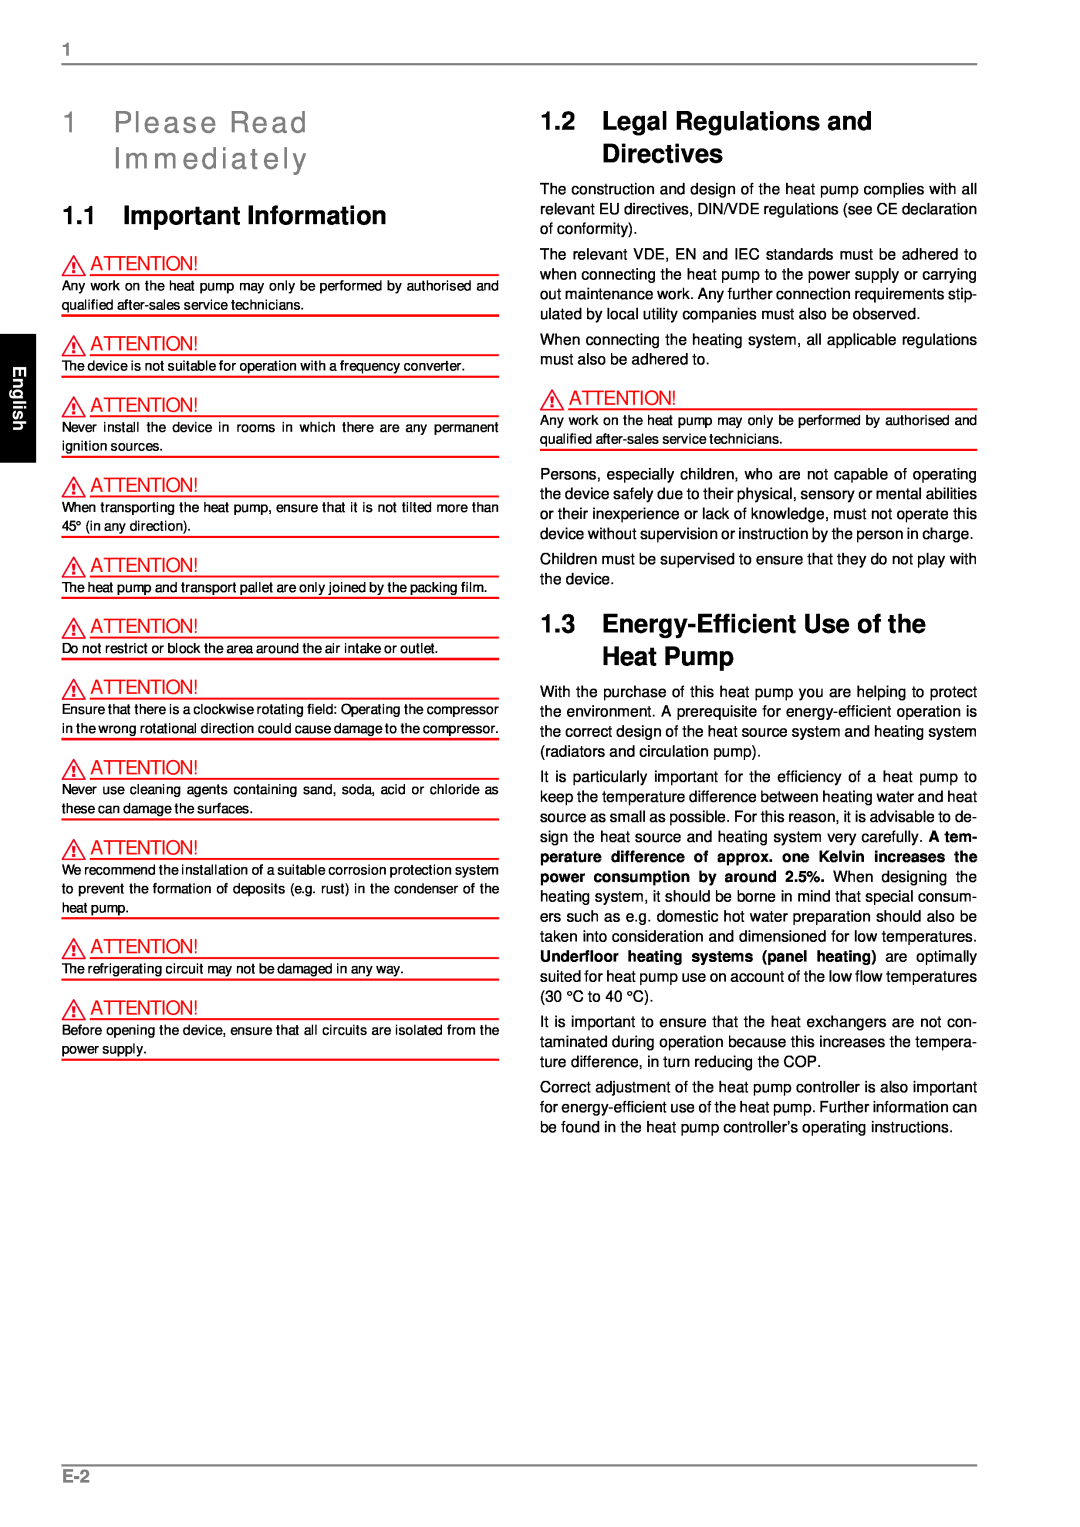 Dimplex LA 11PS manual 1Please Read Immediately, 1.1Important Information, 1.2Legal Regulations and Directives, English 